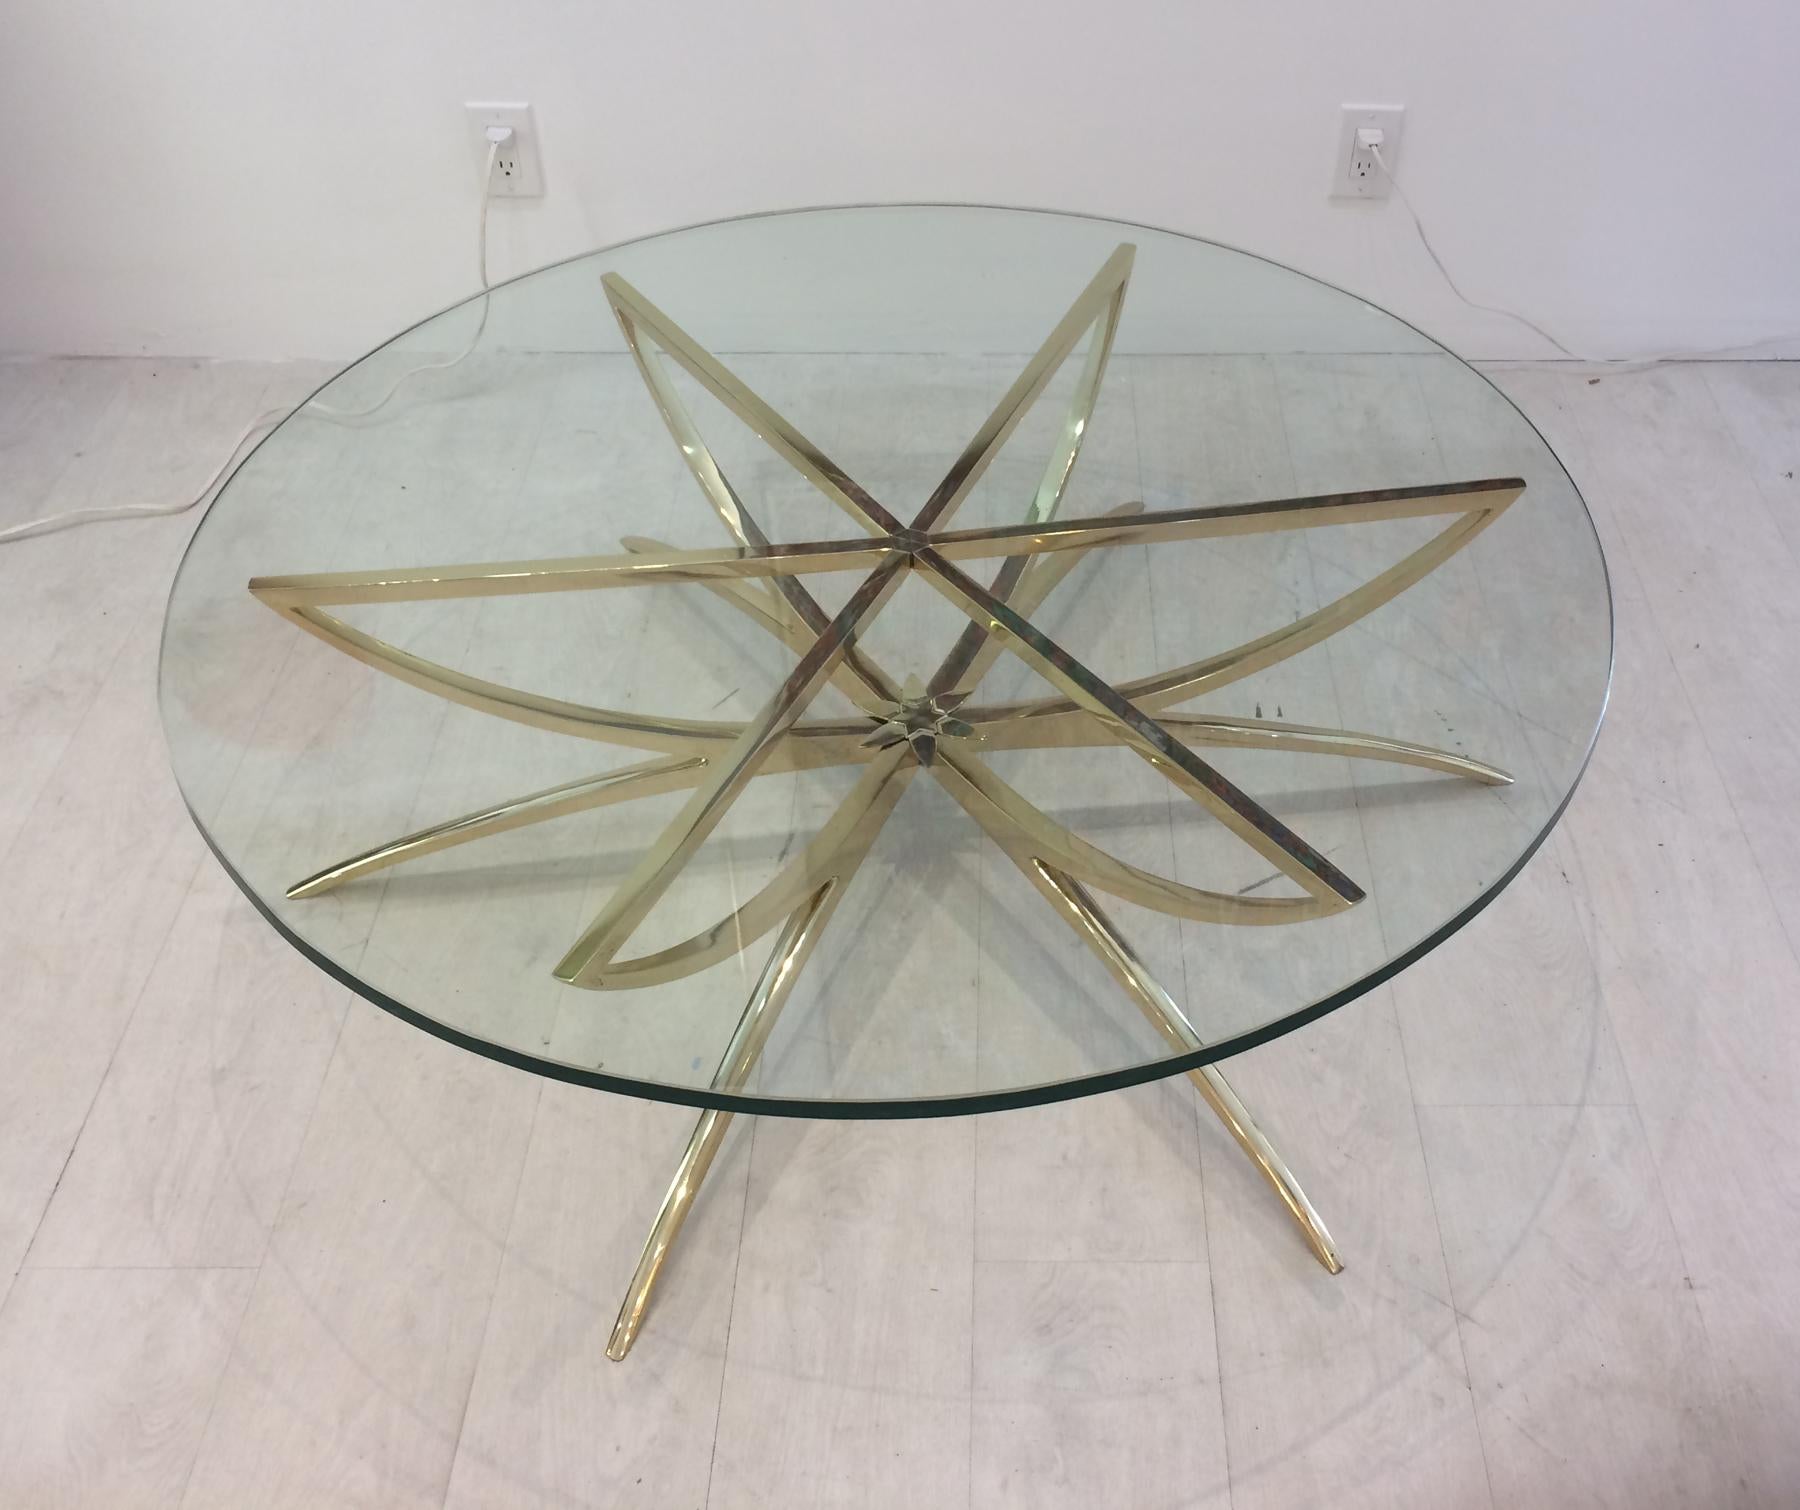 In the style of Carlo de Carli solid brass coffee table. Base has been polished and lacquered. Has a ¾ inch glass top is in very good condition. Looks stunning and is in ready to place in your home
48 inch diameter top. Though this table has a